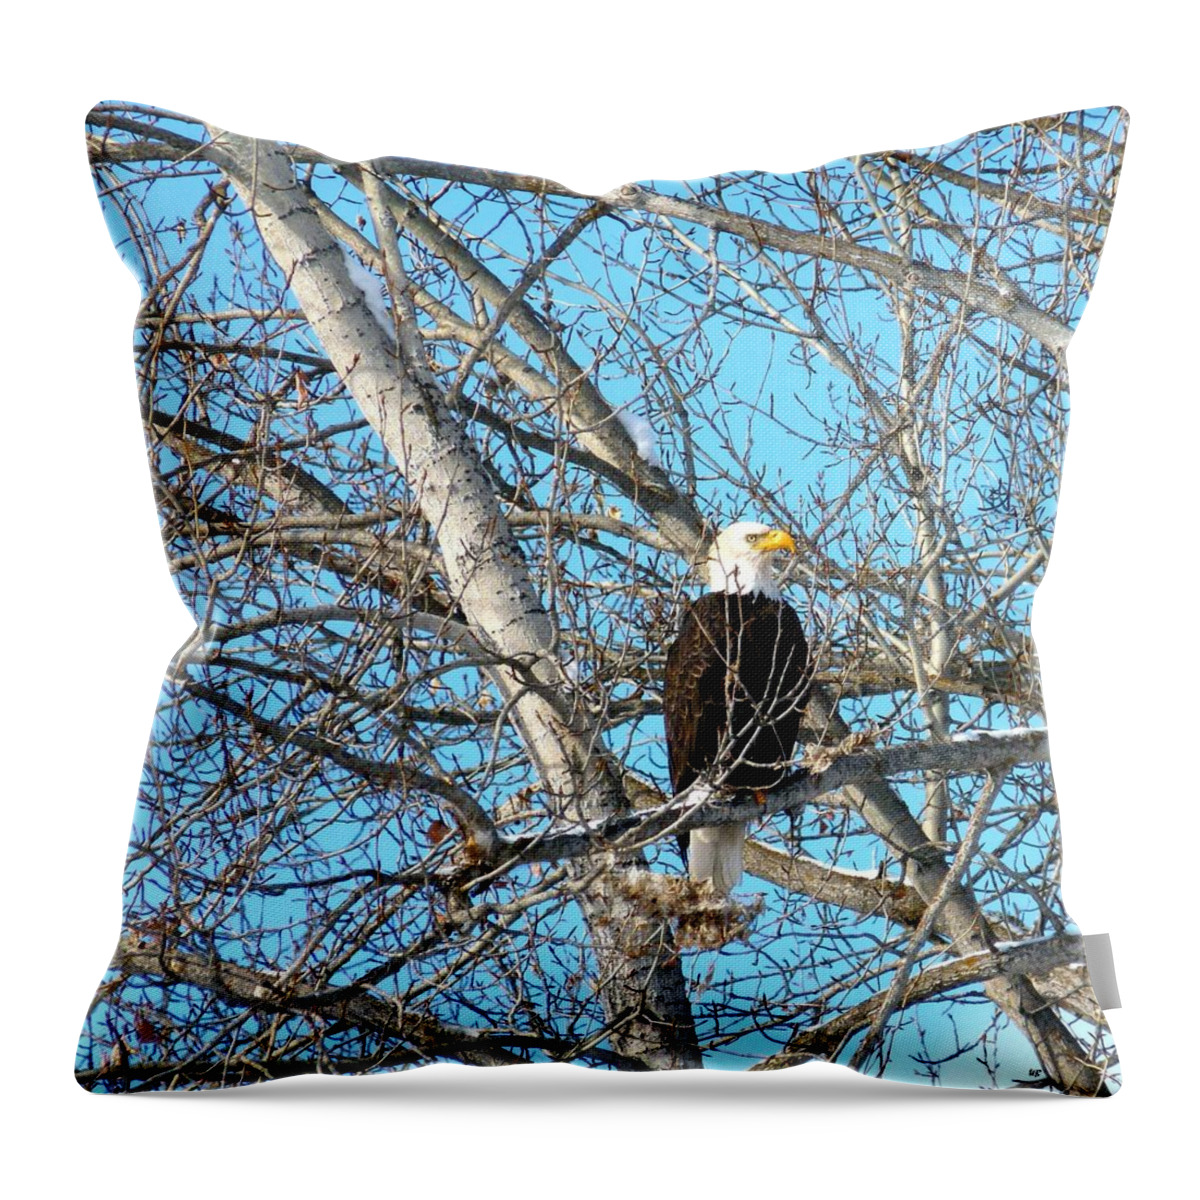 #amajesticbaldeagle Throw Pillow featuring the photograph A Majestic Bald Eagle by Will Borden